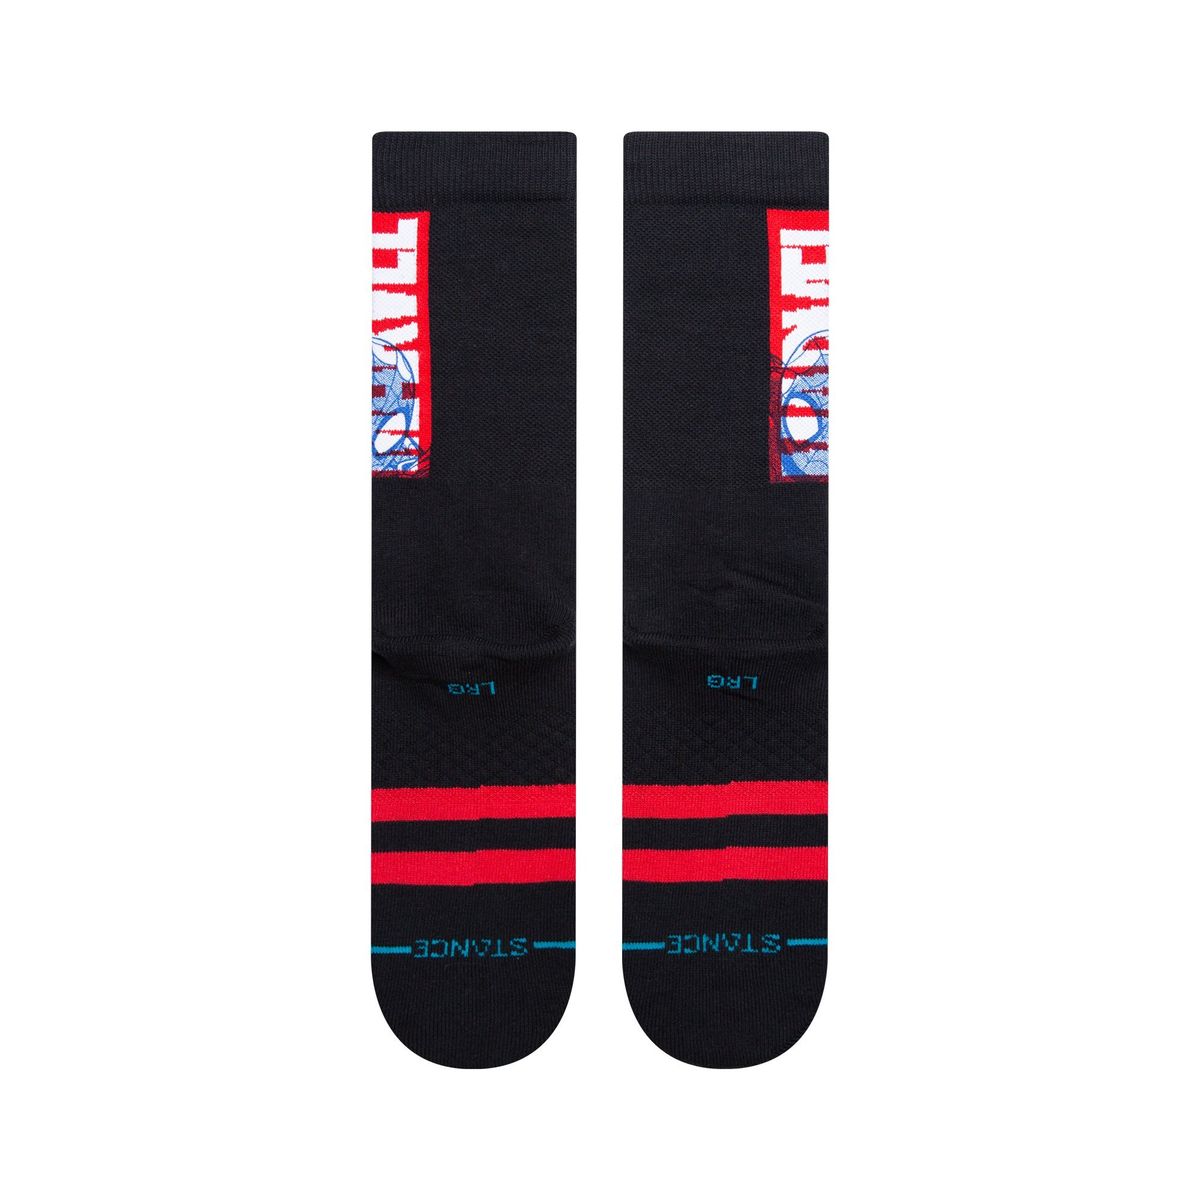 A558C21THE - Calze - Stance Socks